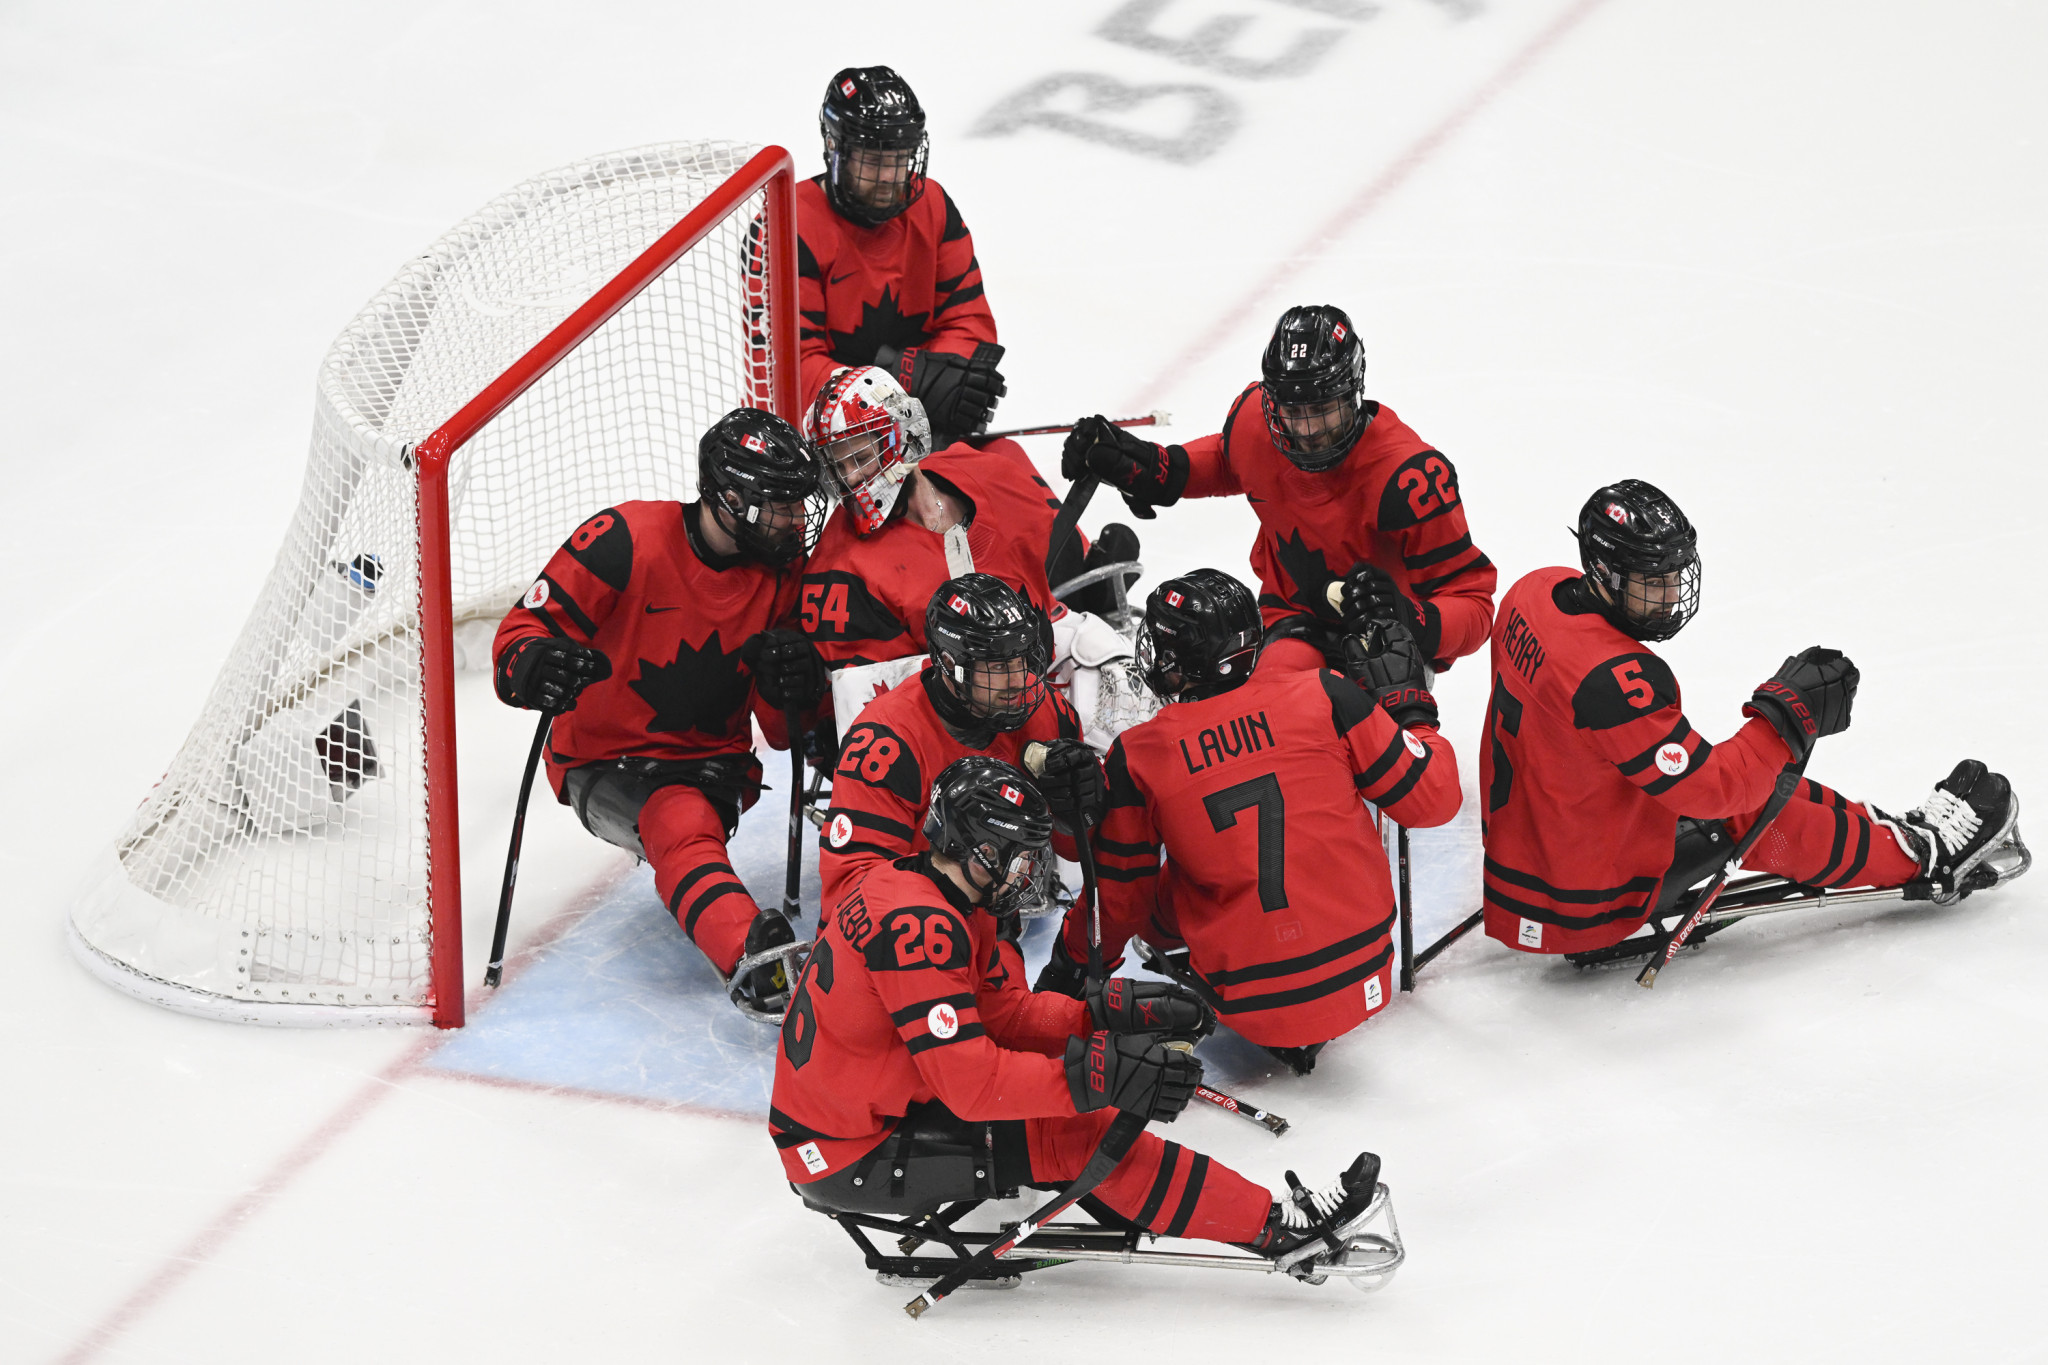 Hosts Canada eyeing fifth gold at World Para Ice Hockey Championships in Moose Jaw